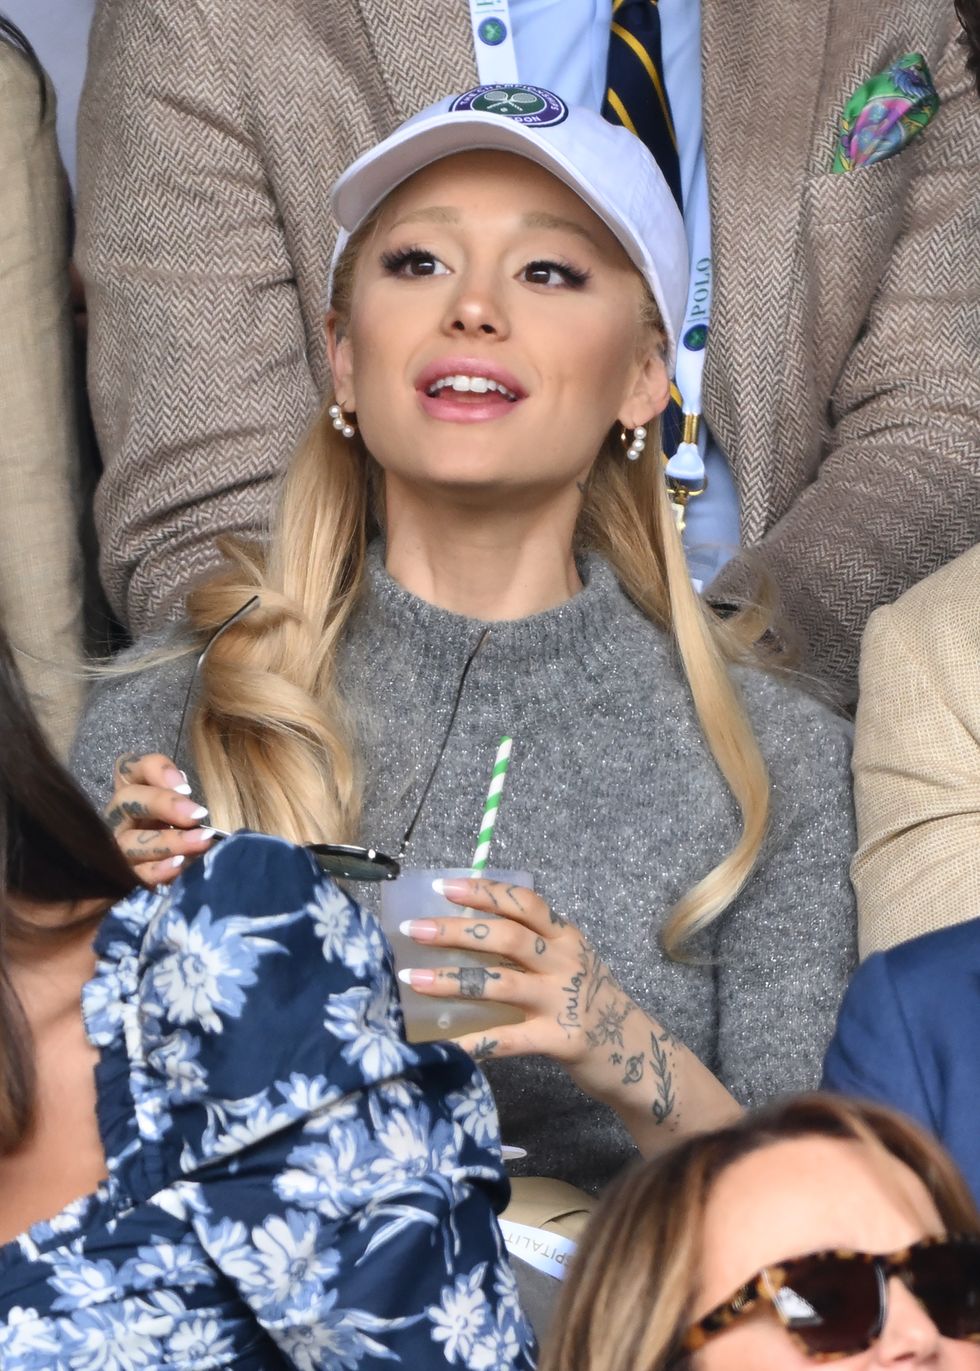 ariana grande at wimbledon without her wedding ring